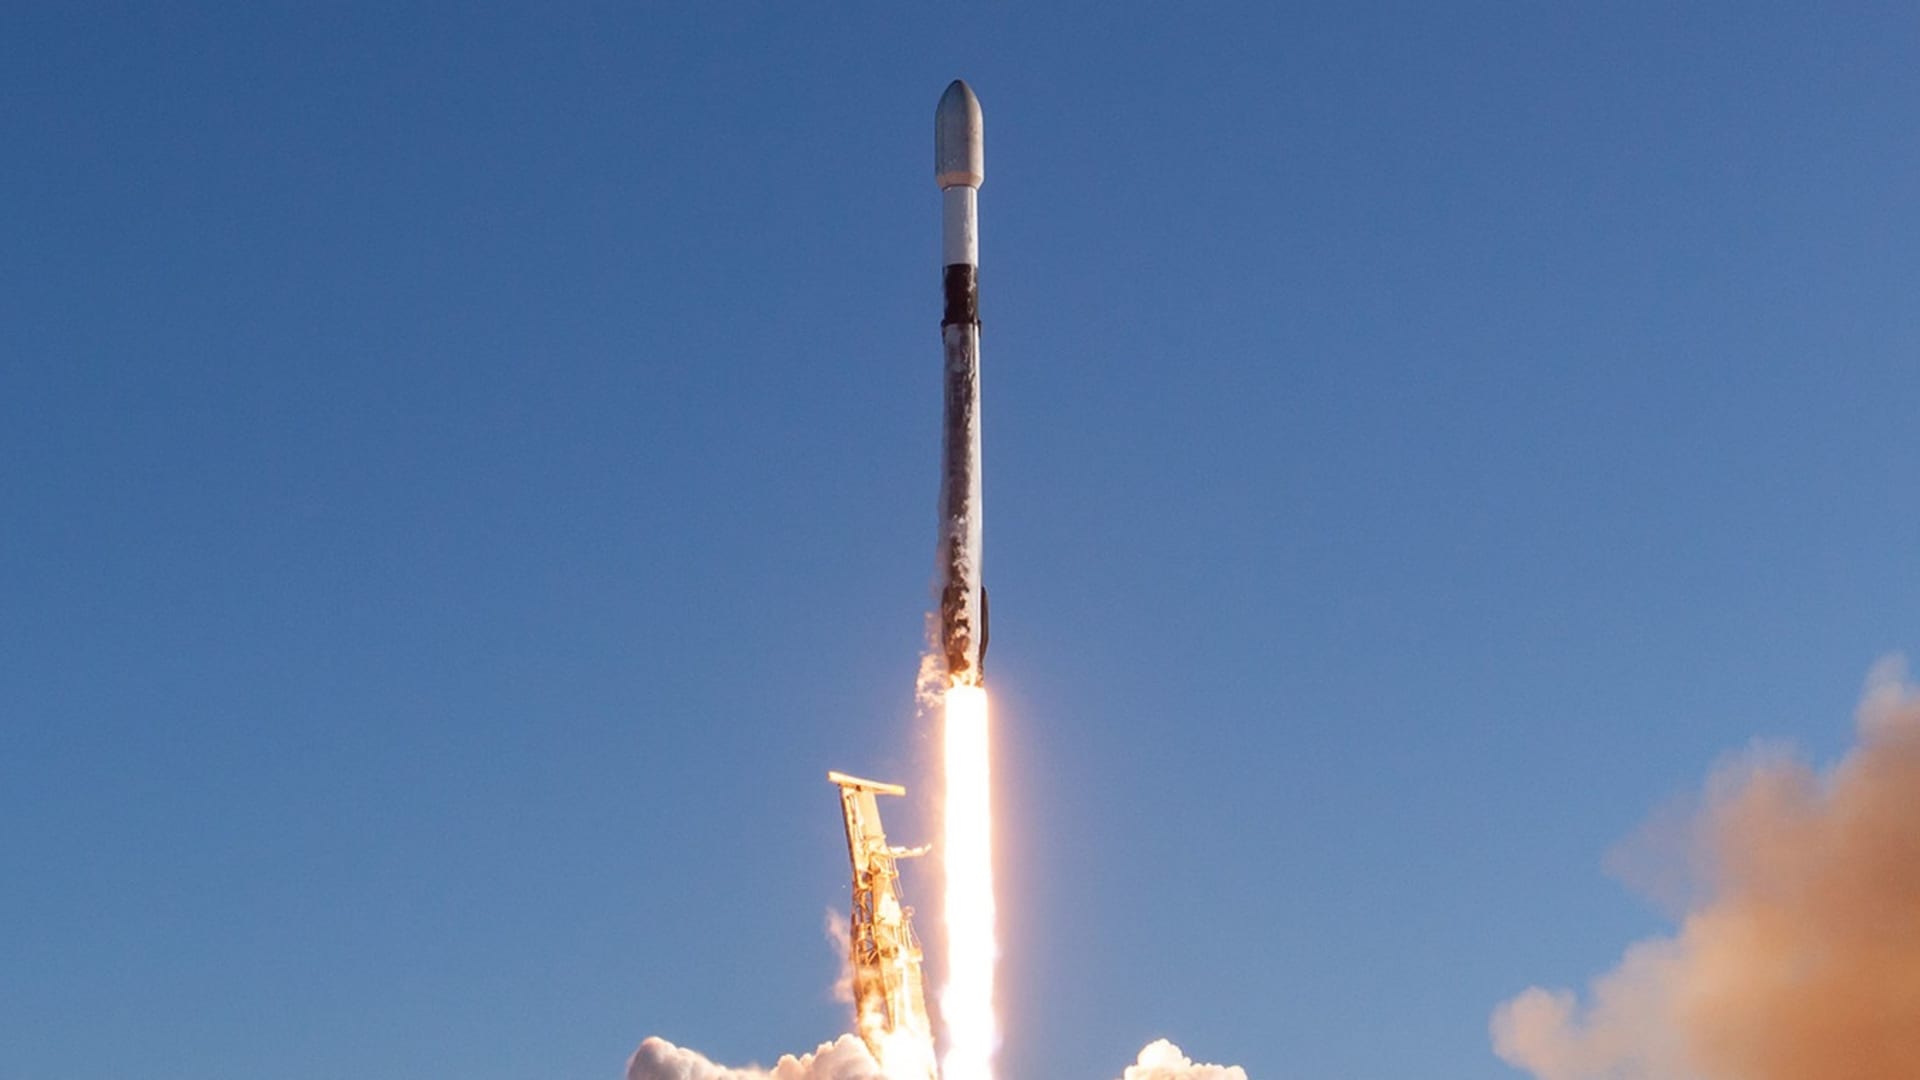 FAA Approves SpaceX to Resume Falcon 9 Rocket Launches